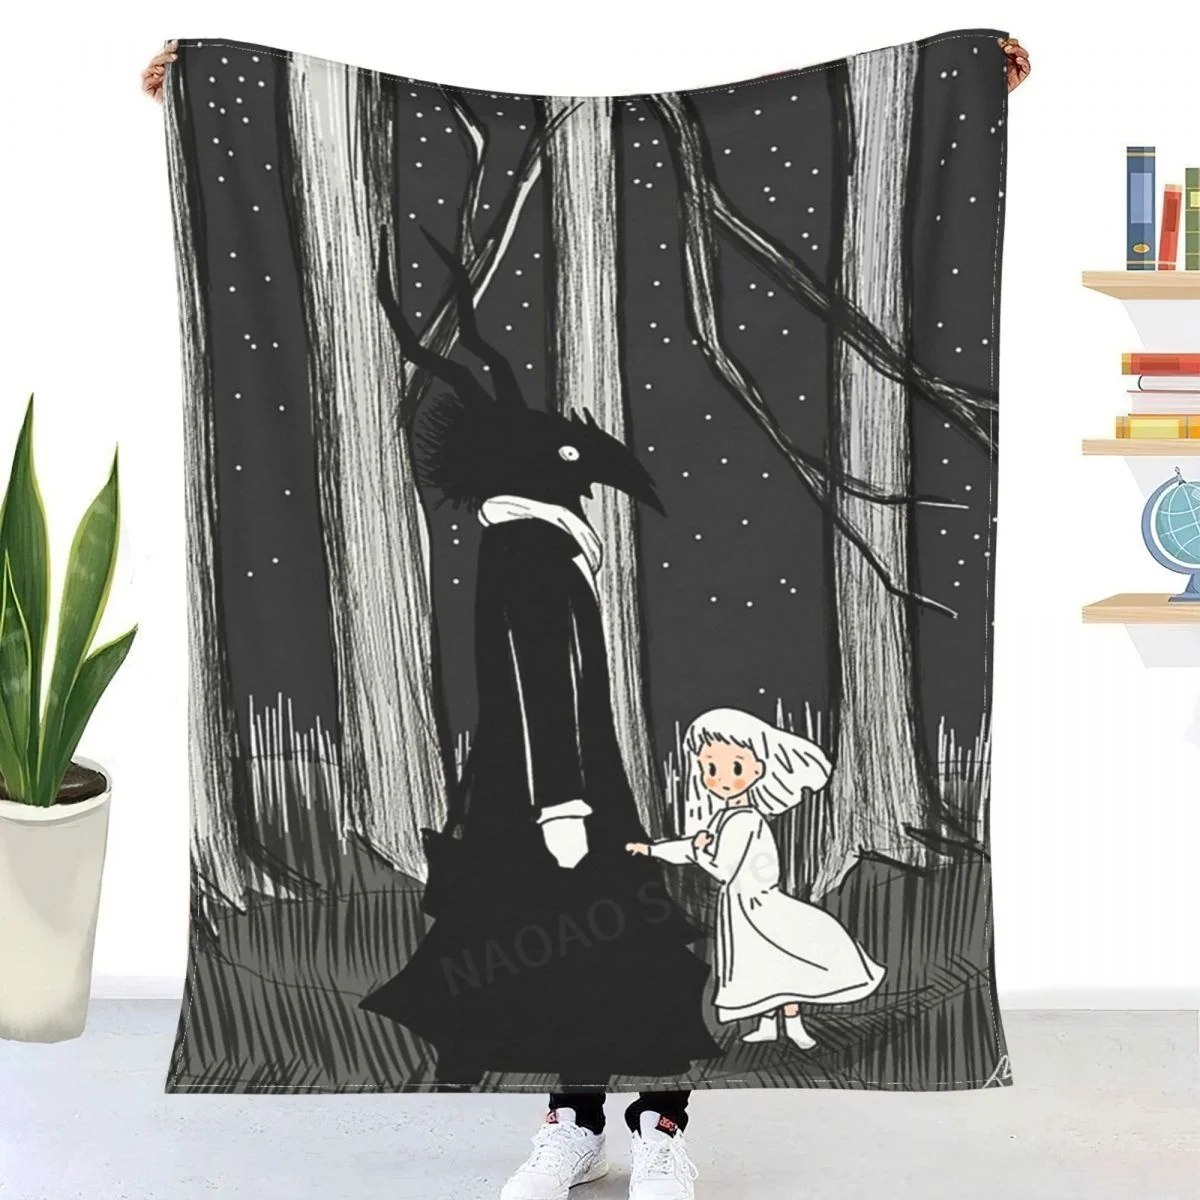 

Siuil A Run, The Girl From The Other Side Manga Art Throw Blanket Sheets on the bed blanket/ on the sofa decorative bedspreads